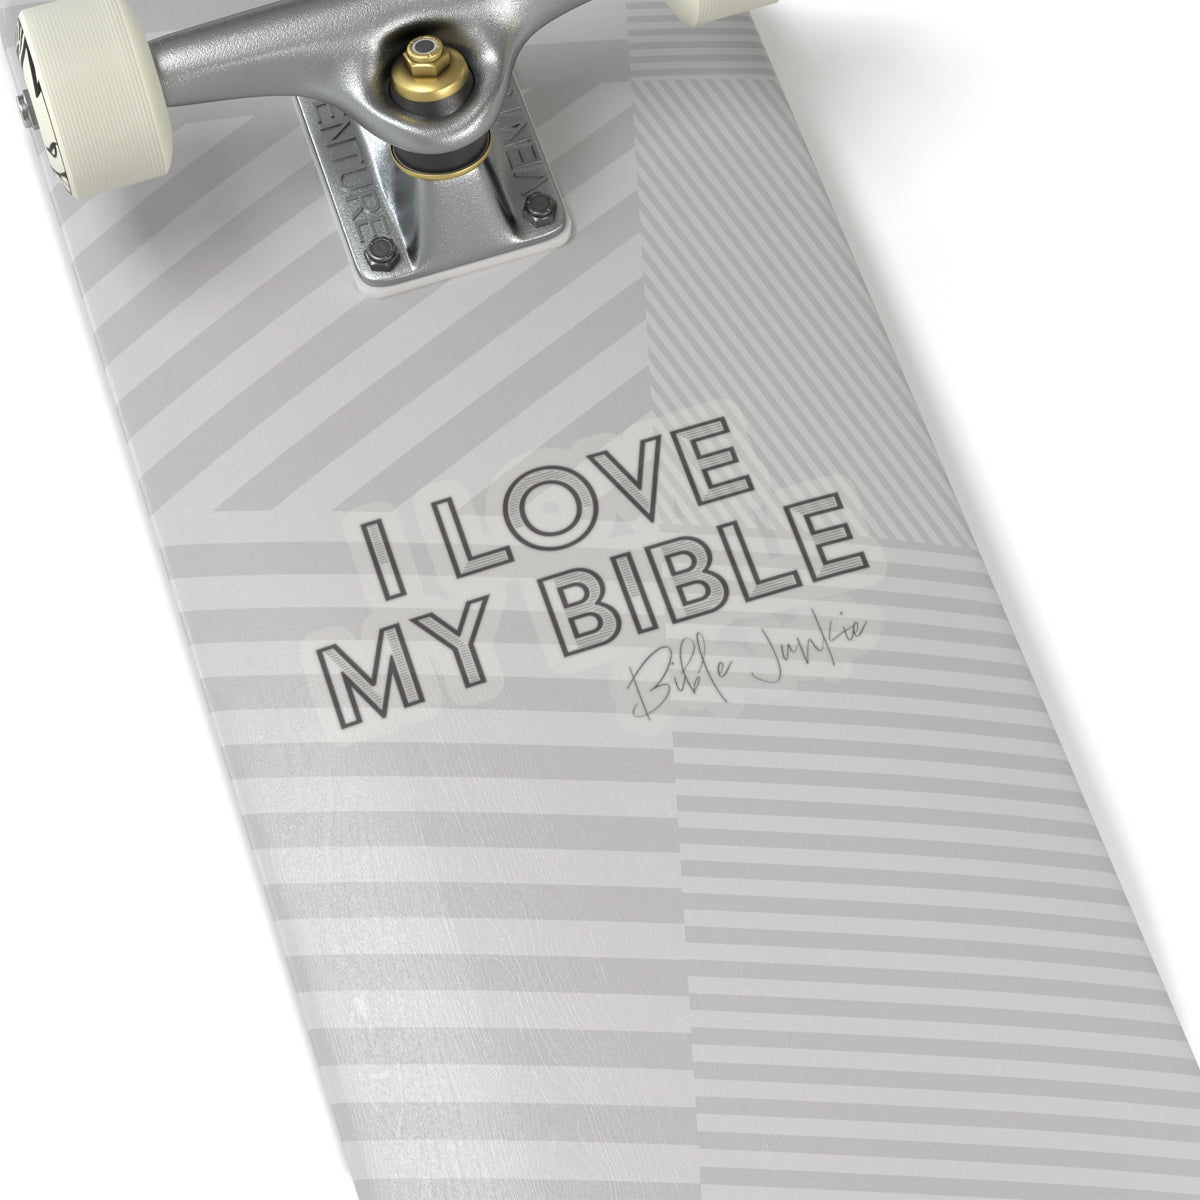 LOVE MY BIBLE. Gods Word. Wear It. Share It. Live your Faith Out Loud. Stickers for. Cars. Trucks. Computers. Gifts. Christian. Faith. Hope. Believe.